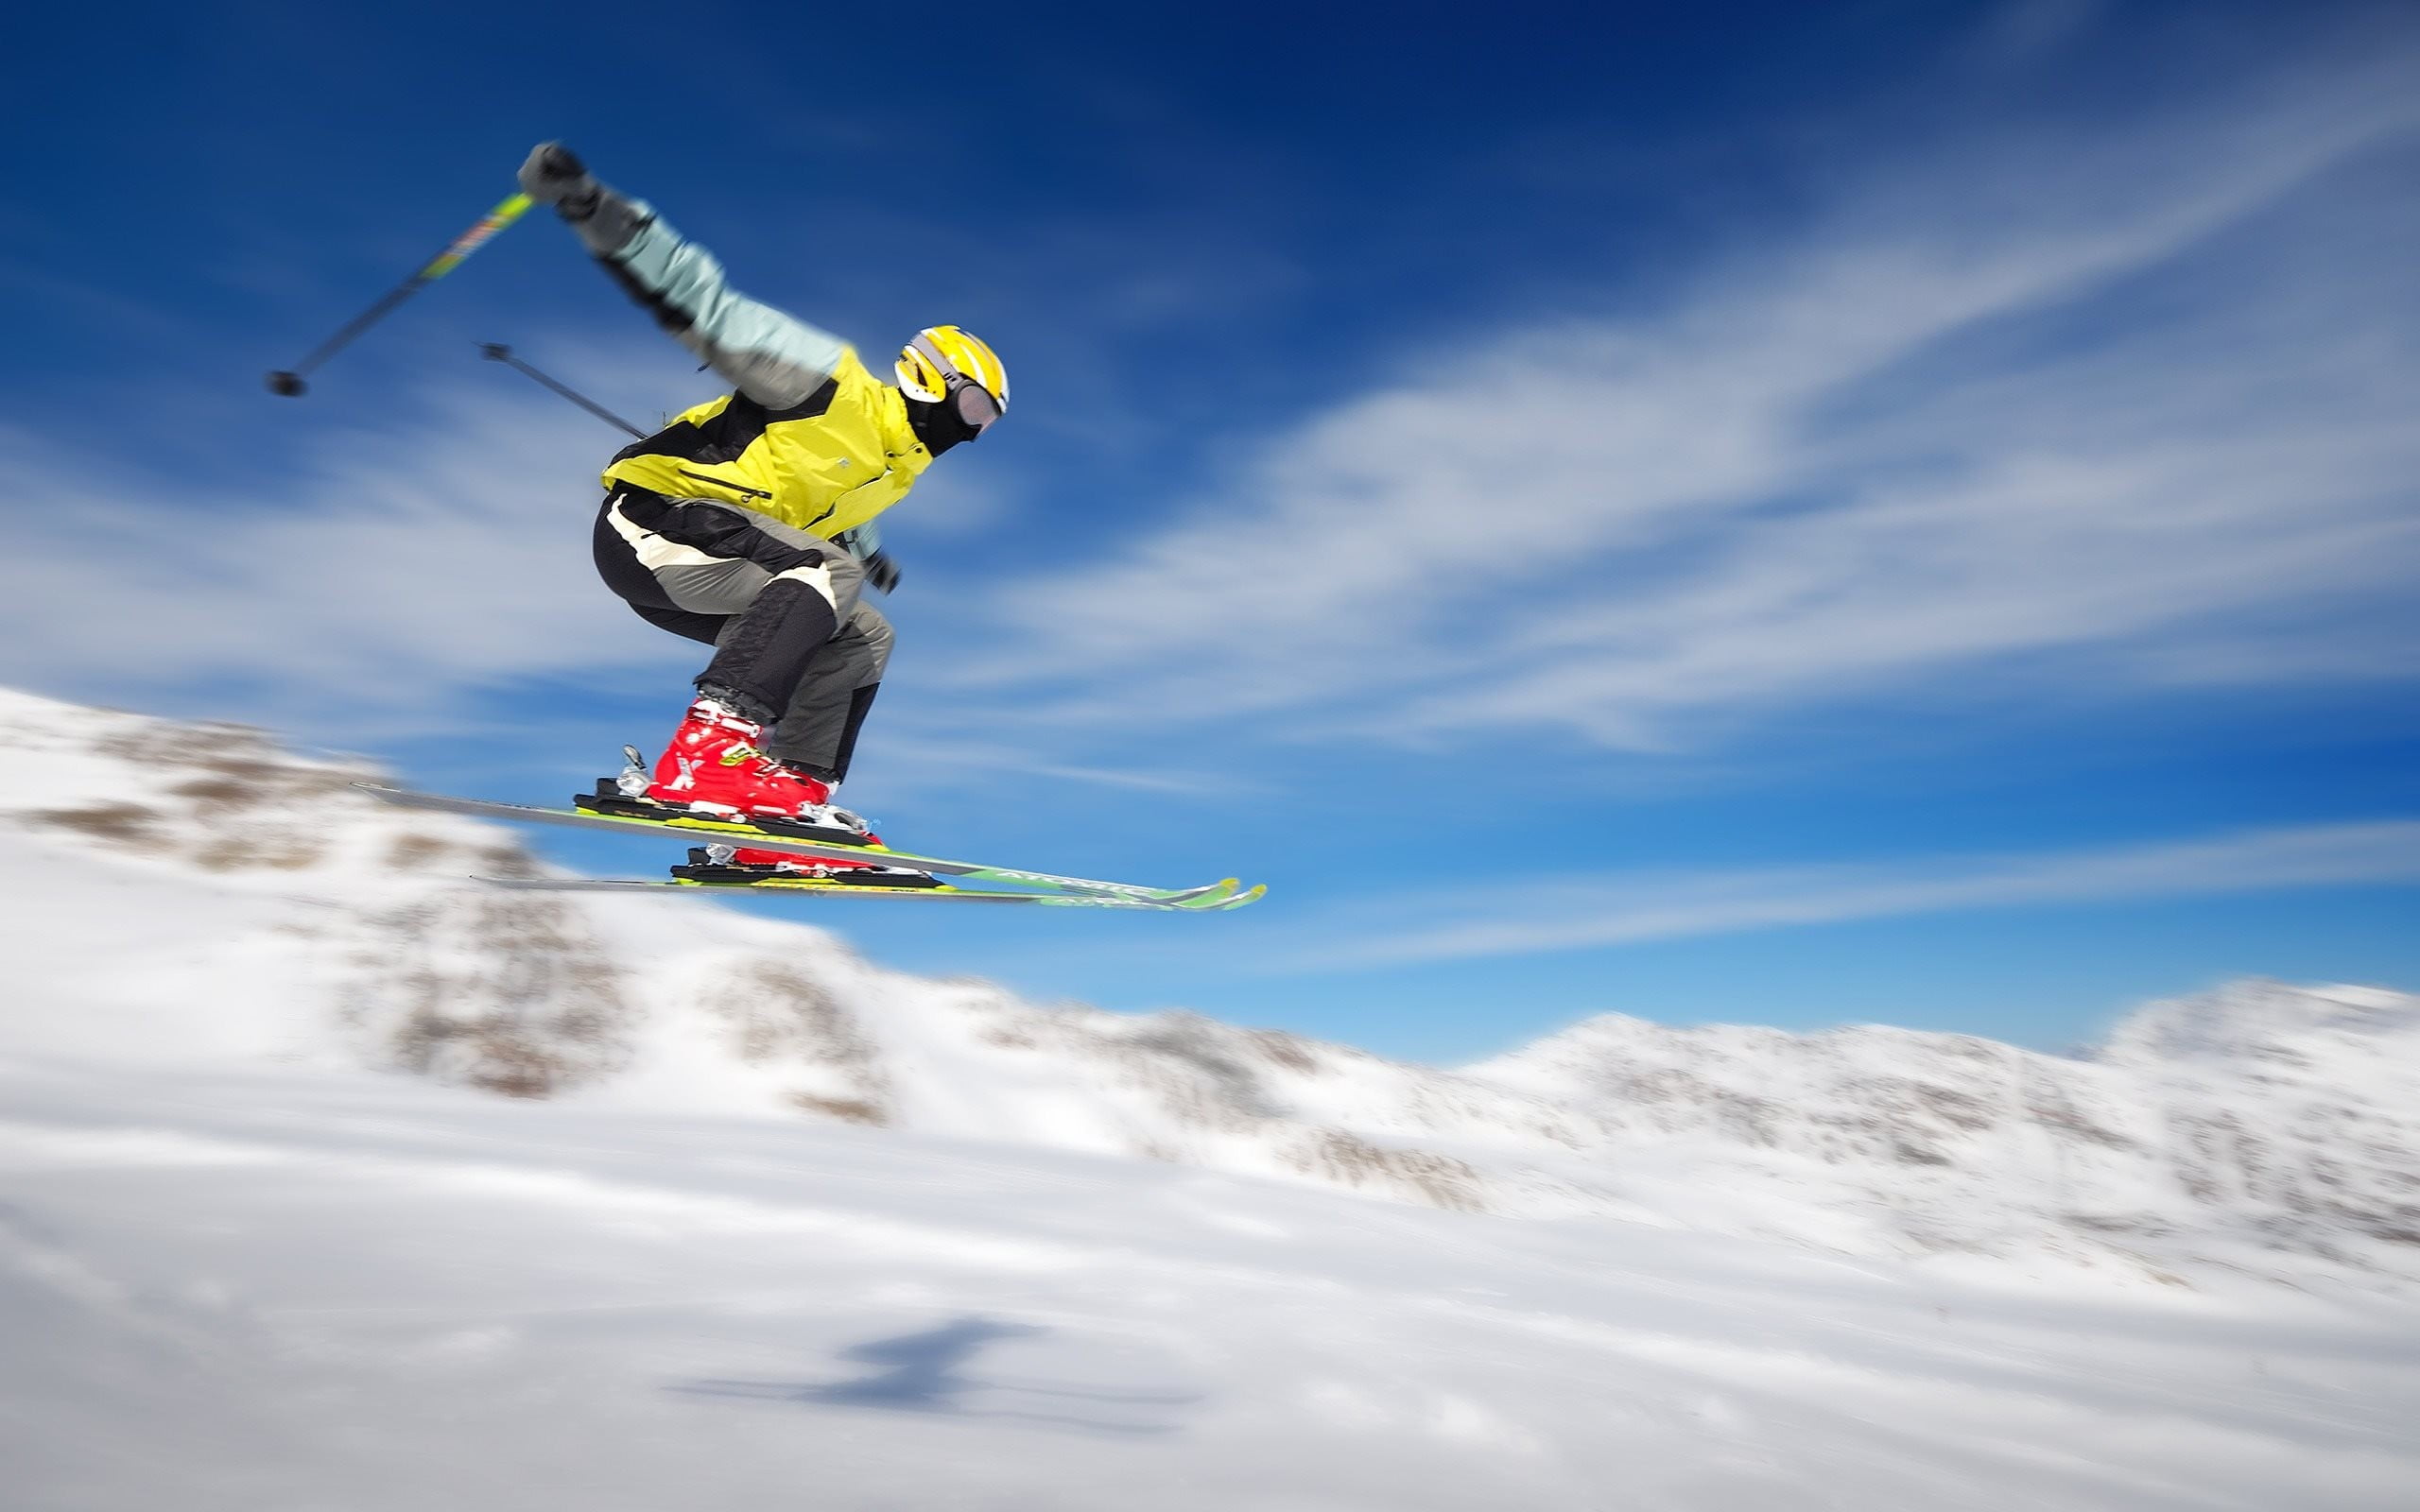 yellow and white jacket, sky, sport , flying, snow, winter, jumping